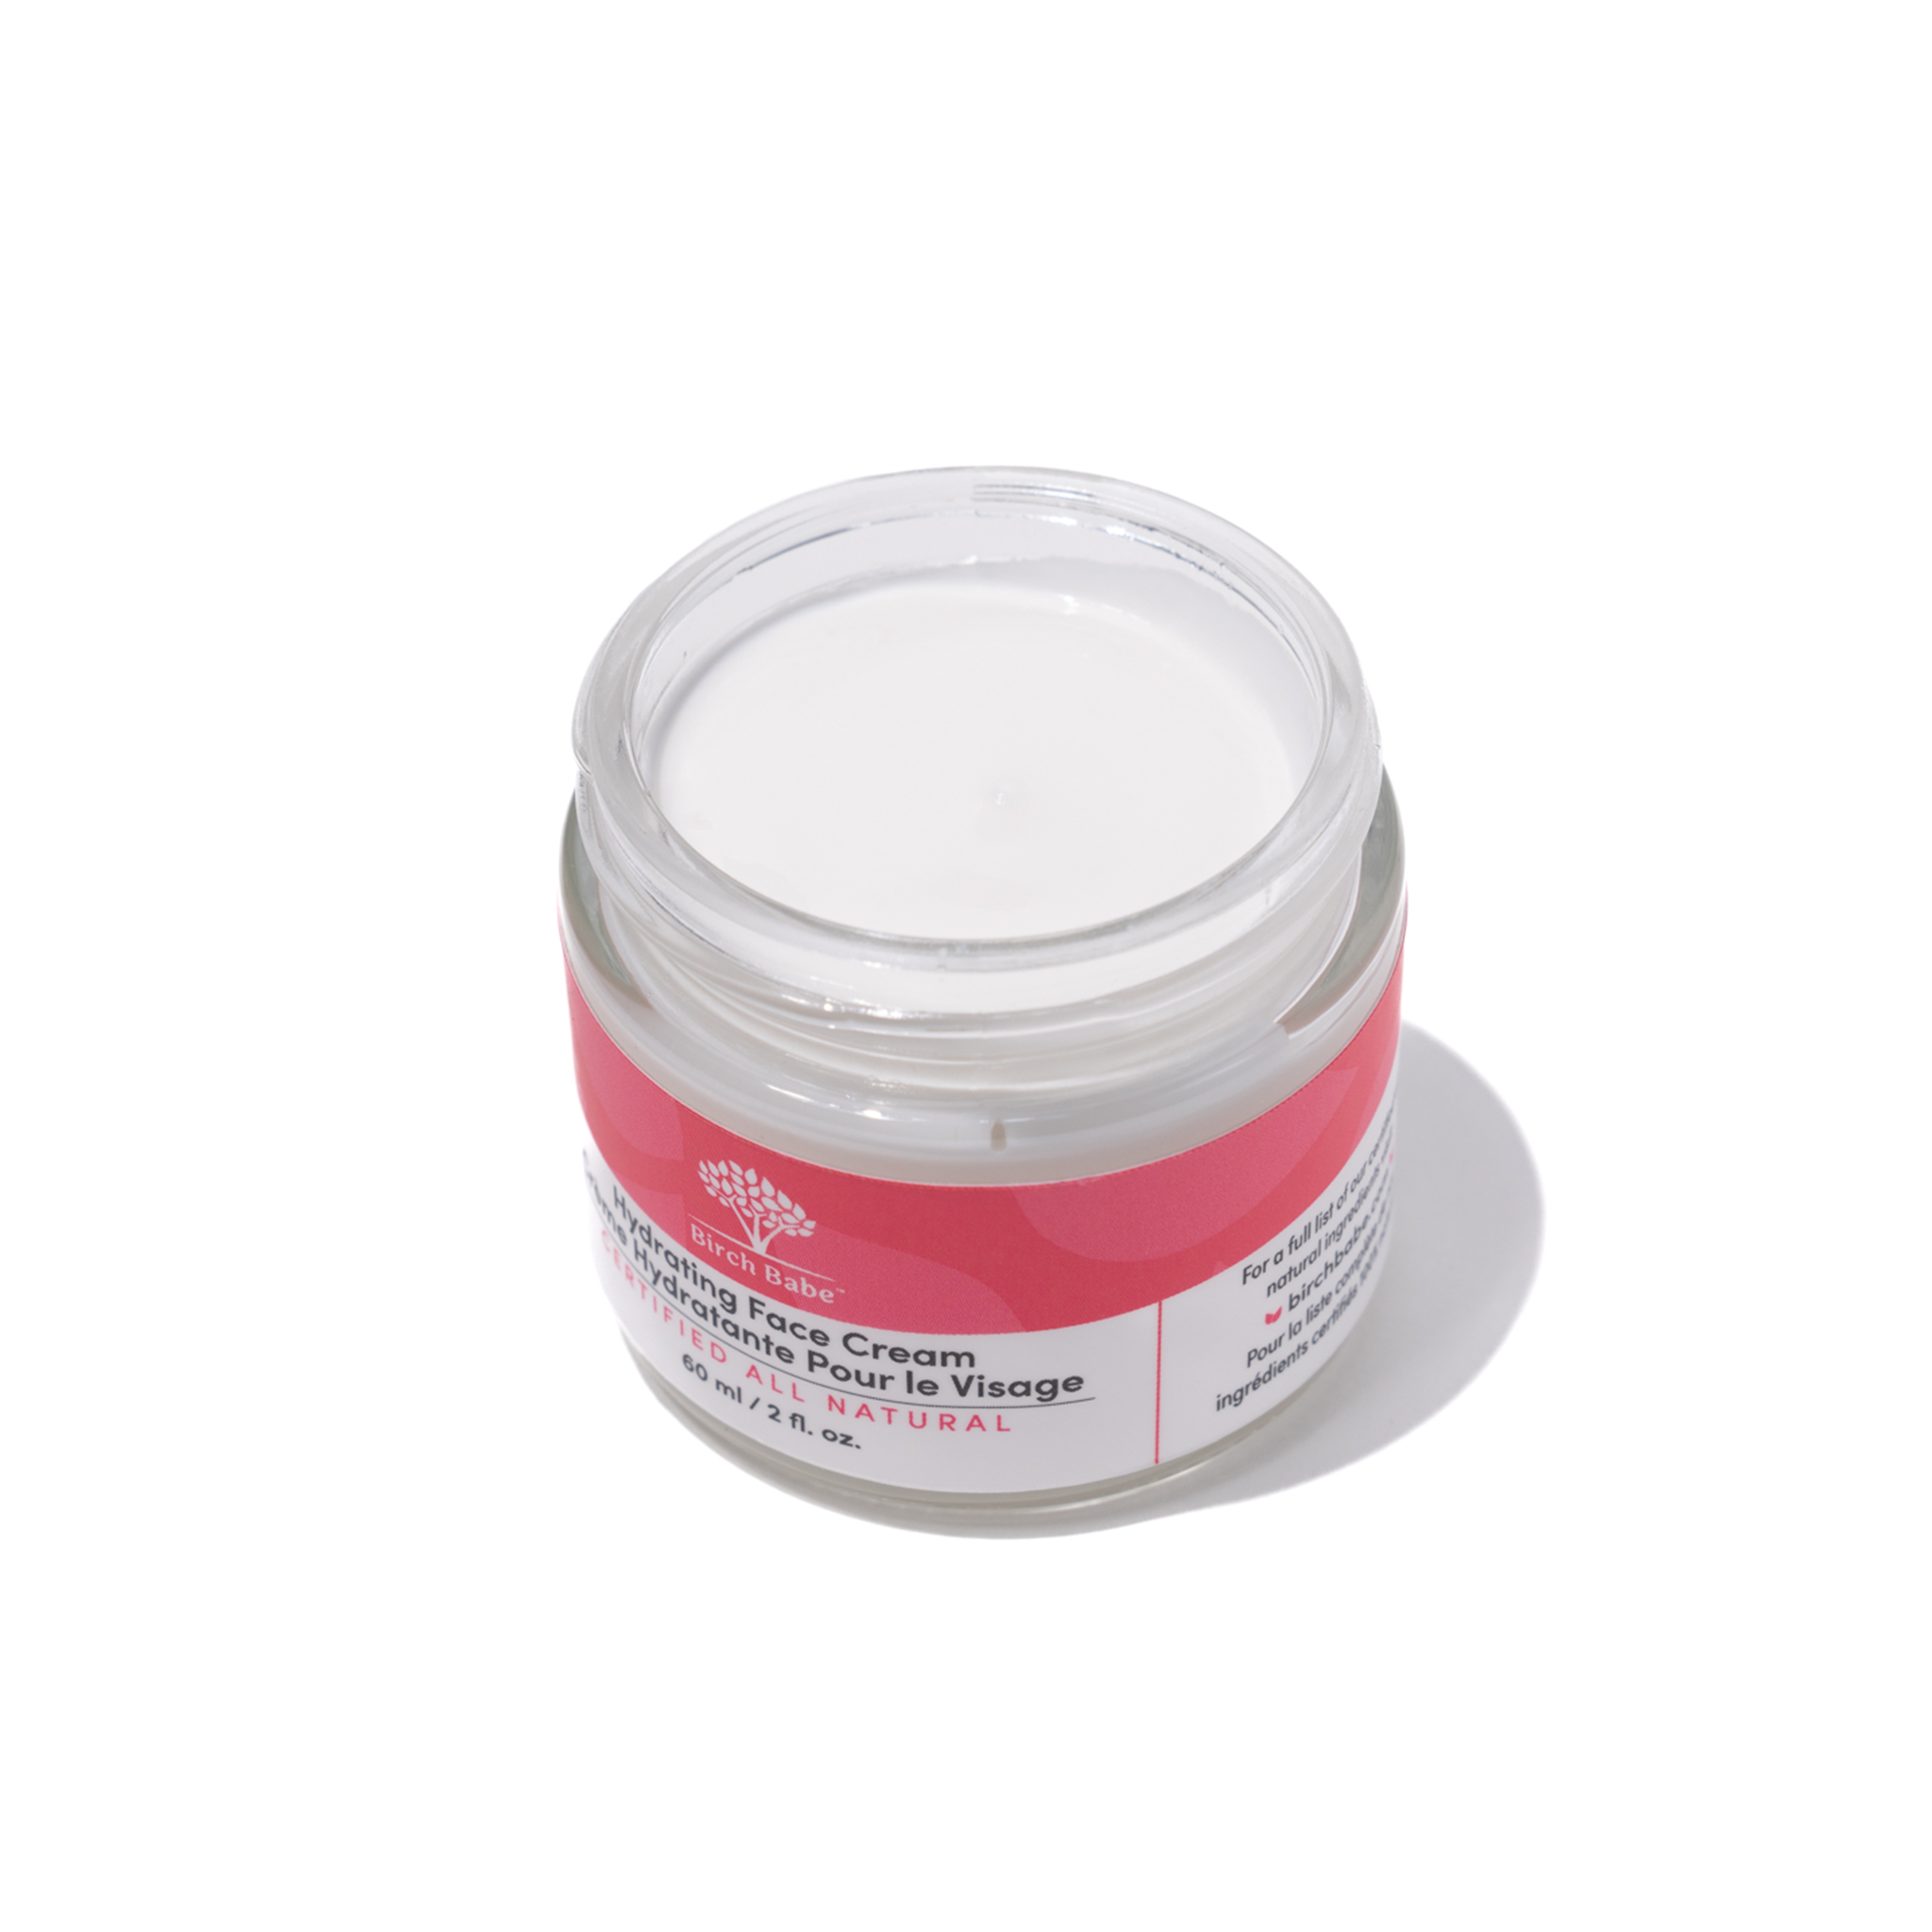 Infused with hyaluronic acid to hydrate and naturally plump skin this hydrating face cream made in canada by birch babe comes in a 60 ml glass jar.